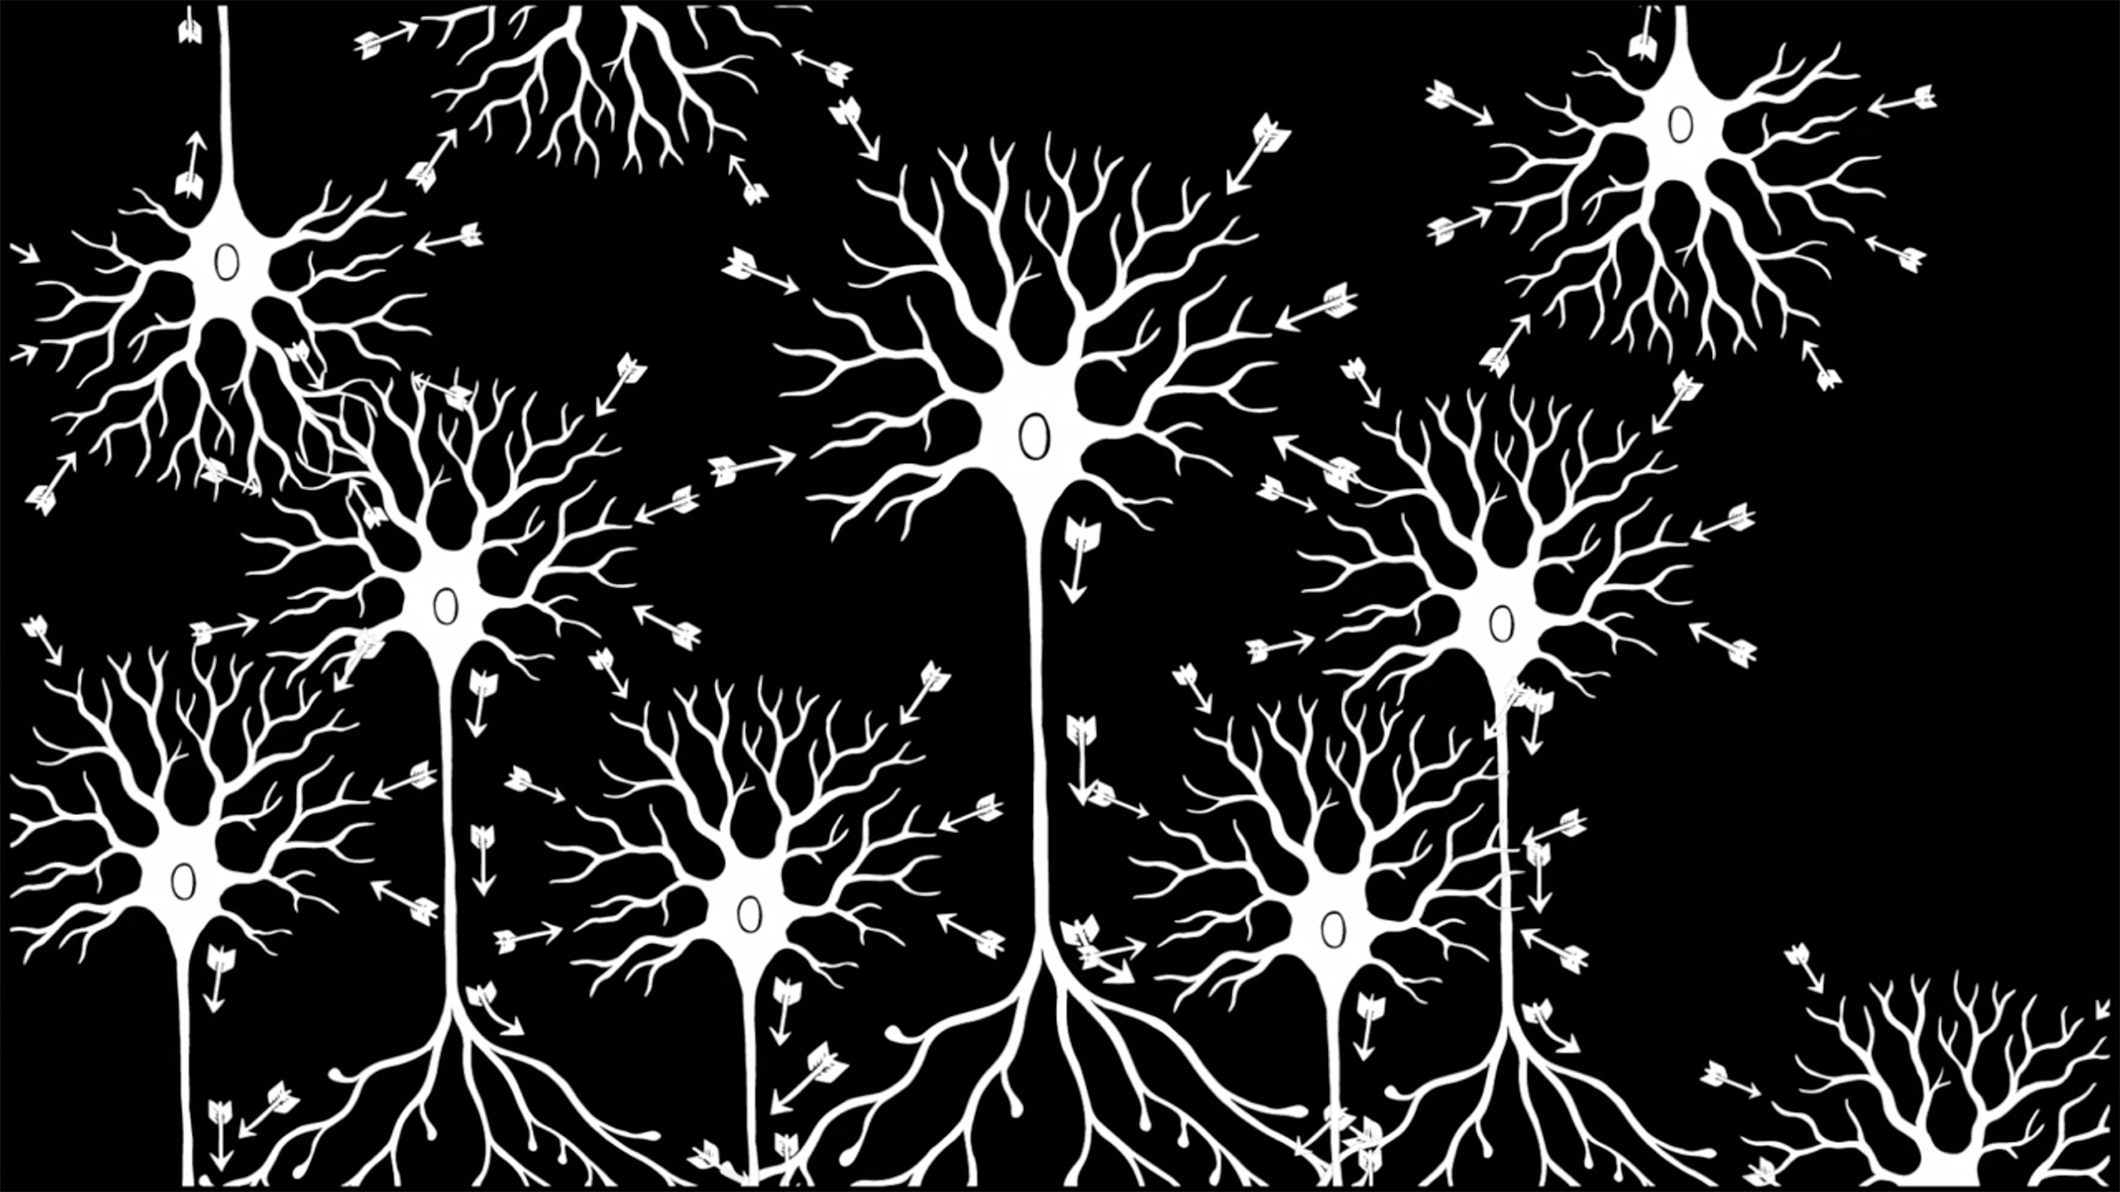 Fundamentals of Neuroscience, Part 2: Neurons and Networks MCB80.2x